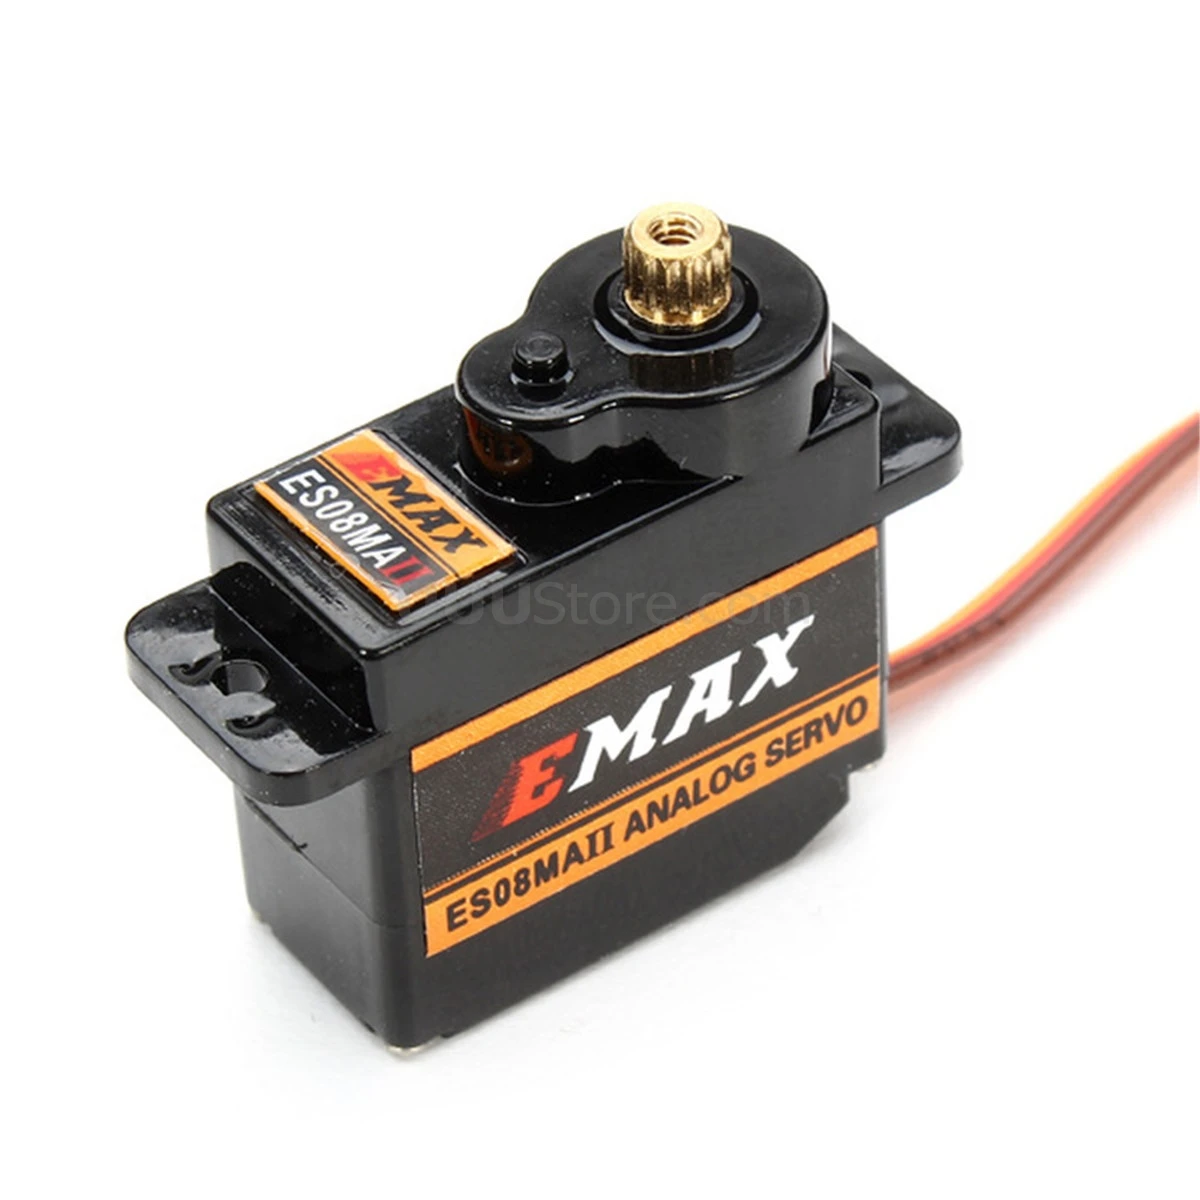 EMAX ES08MA ES08MAII 12g Mini Metal Gear Analog Servo for Rc Hobbies Car Boat Helicopter Airplane Rc Robot Free shipping 6